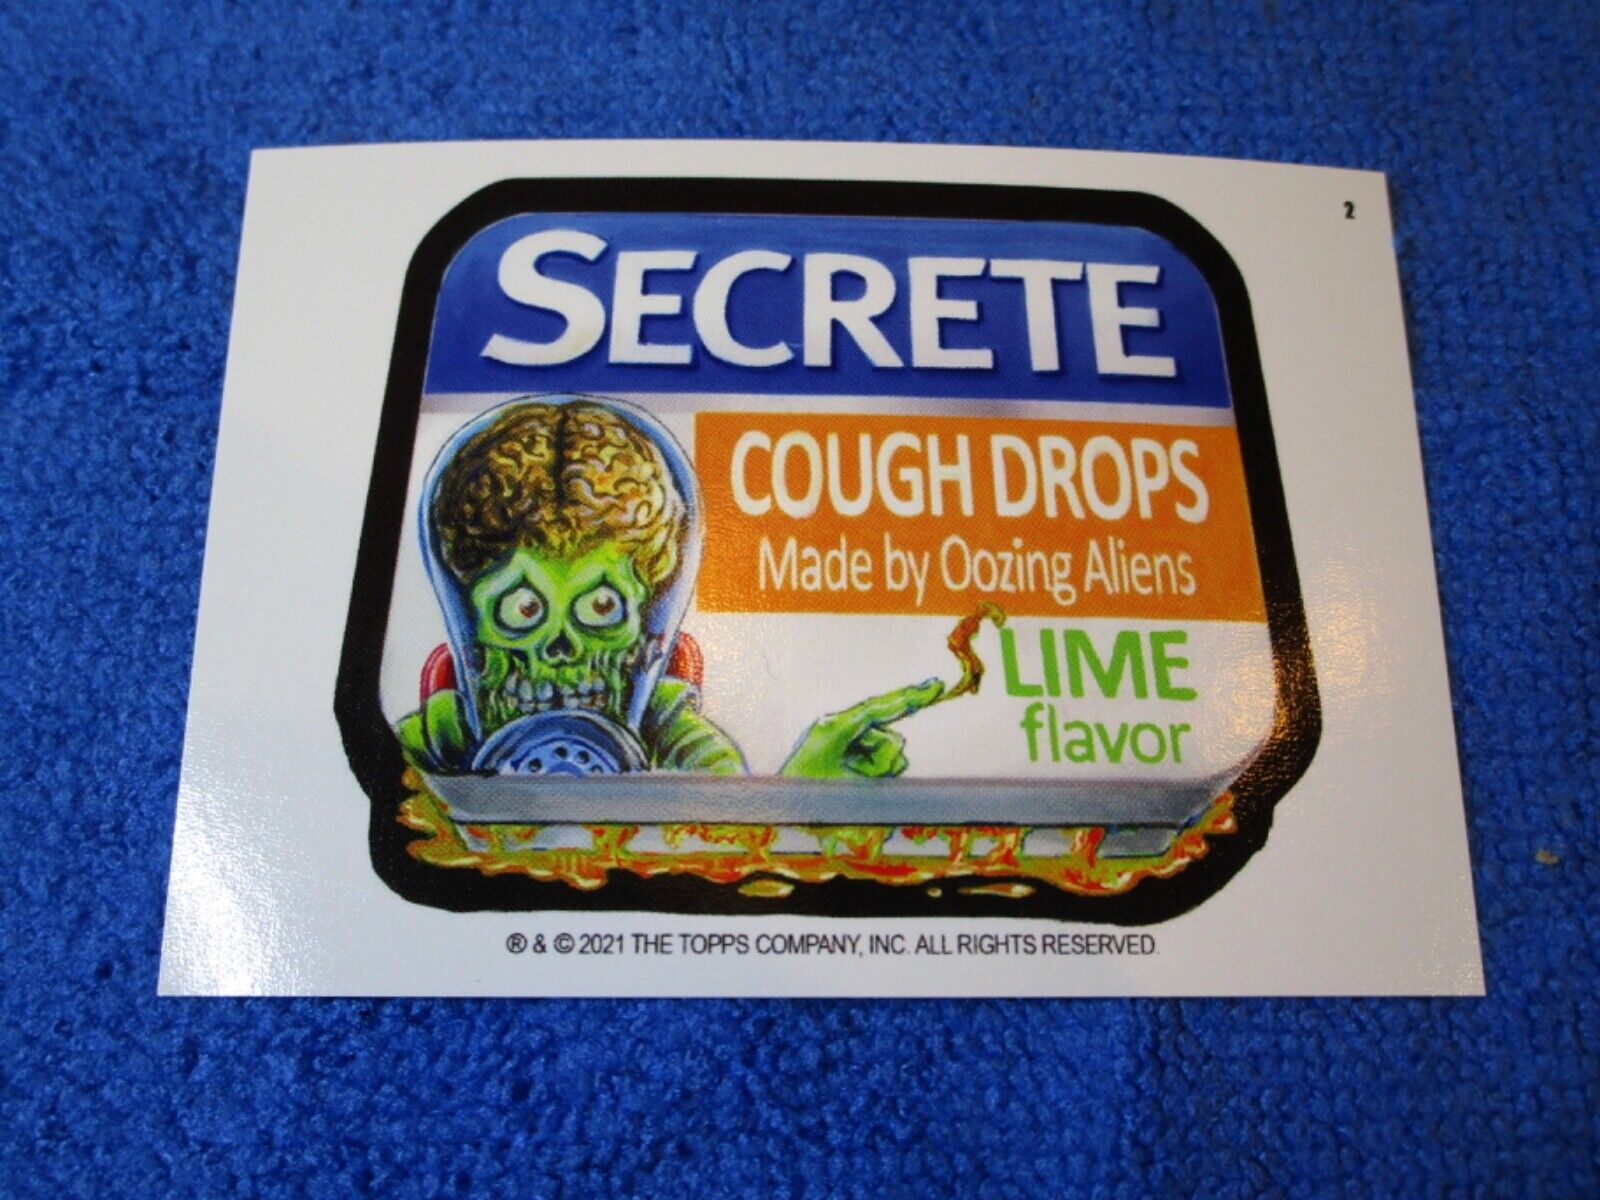 2021 Topps Mars Attacky WACKY PACKAGES Series 5 2 Secrete Cough Drops Variant SP